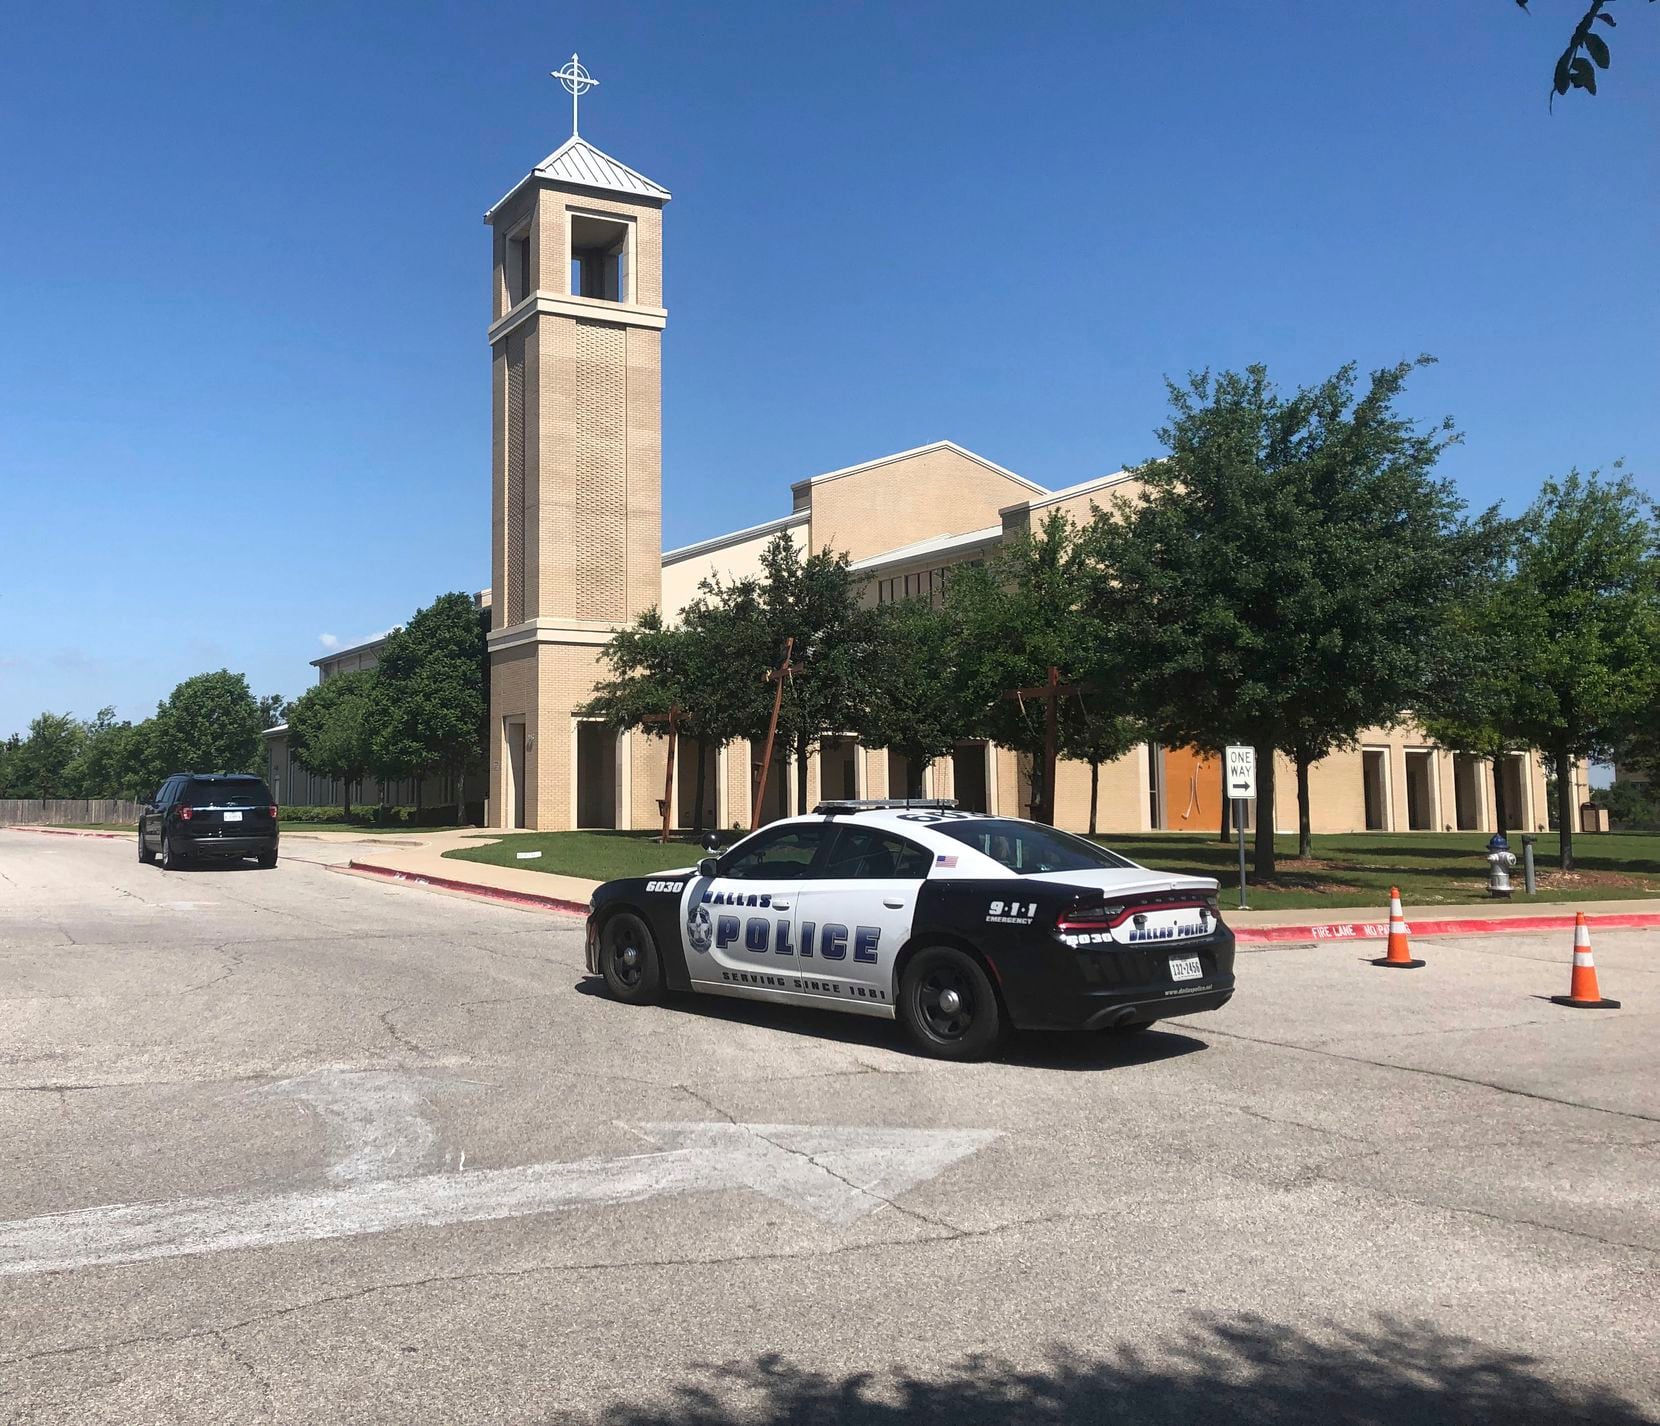 A police car was parked outside St. Cecilia Catholic Church on Wednesday.